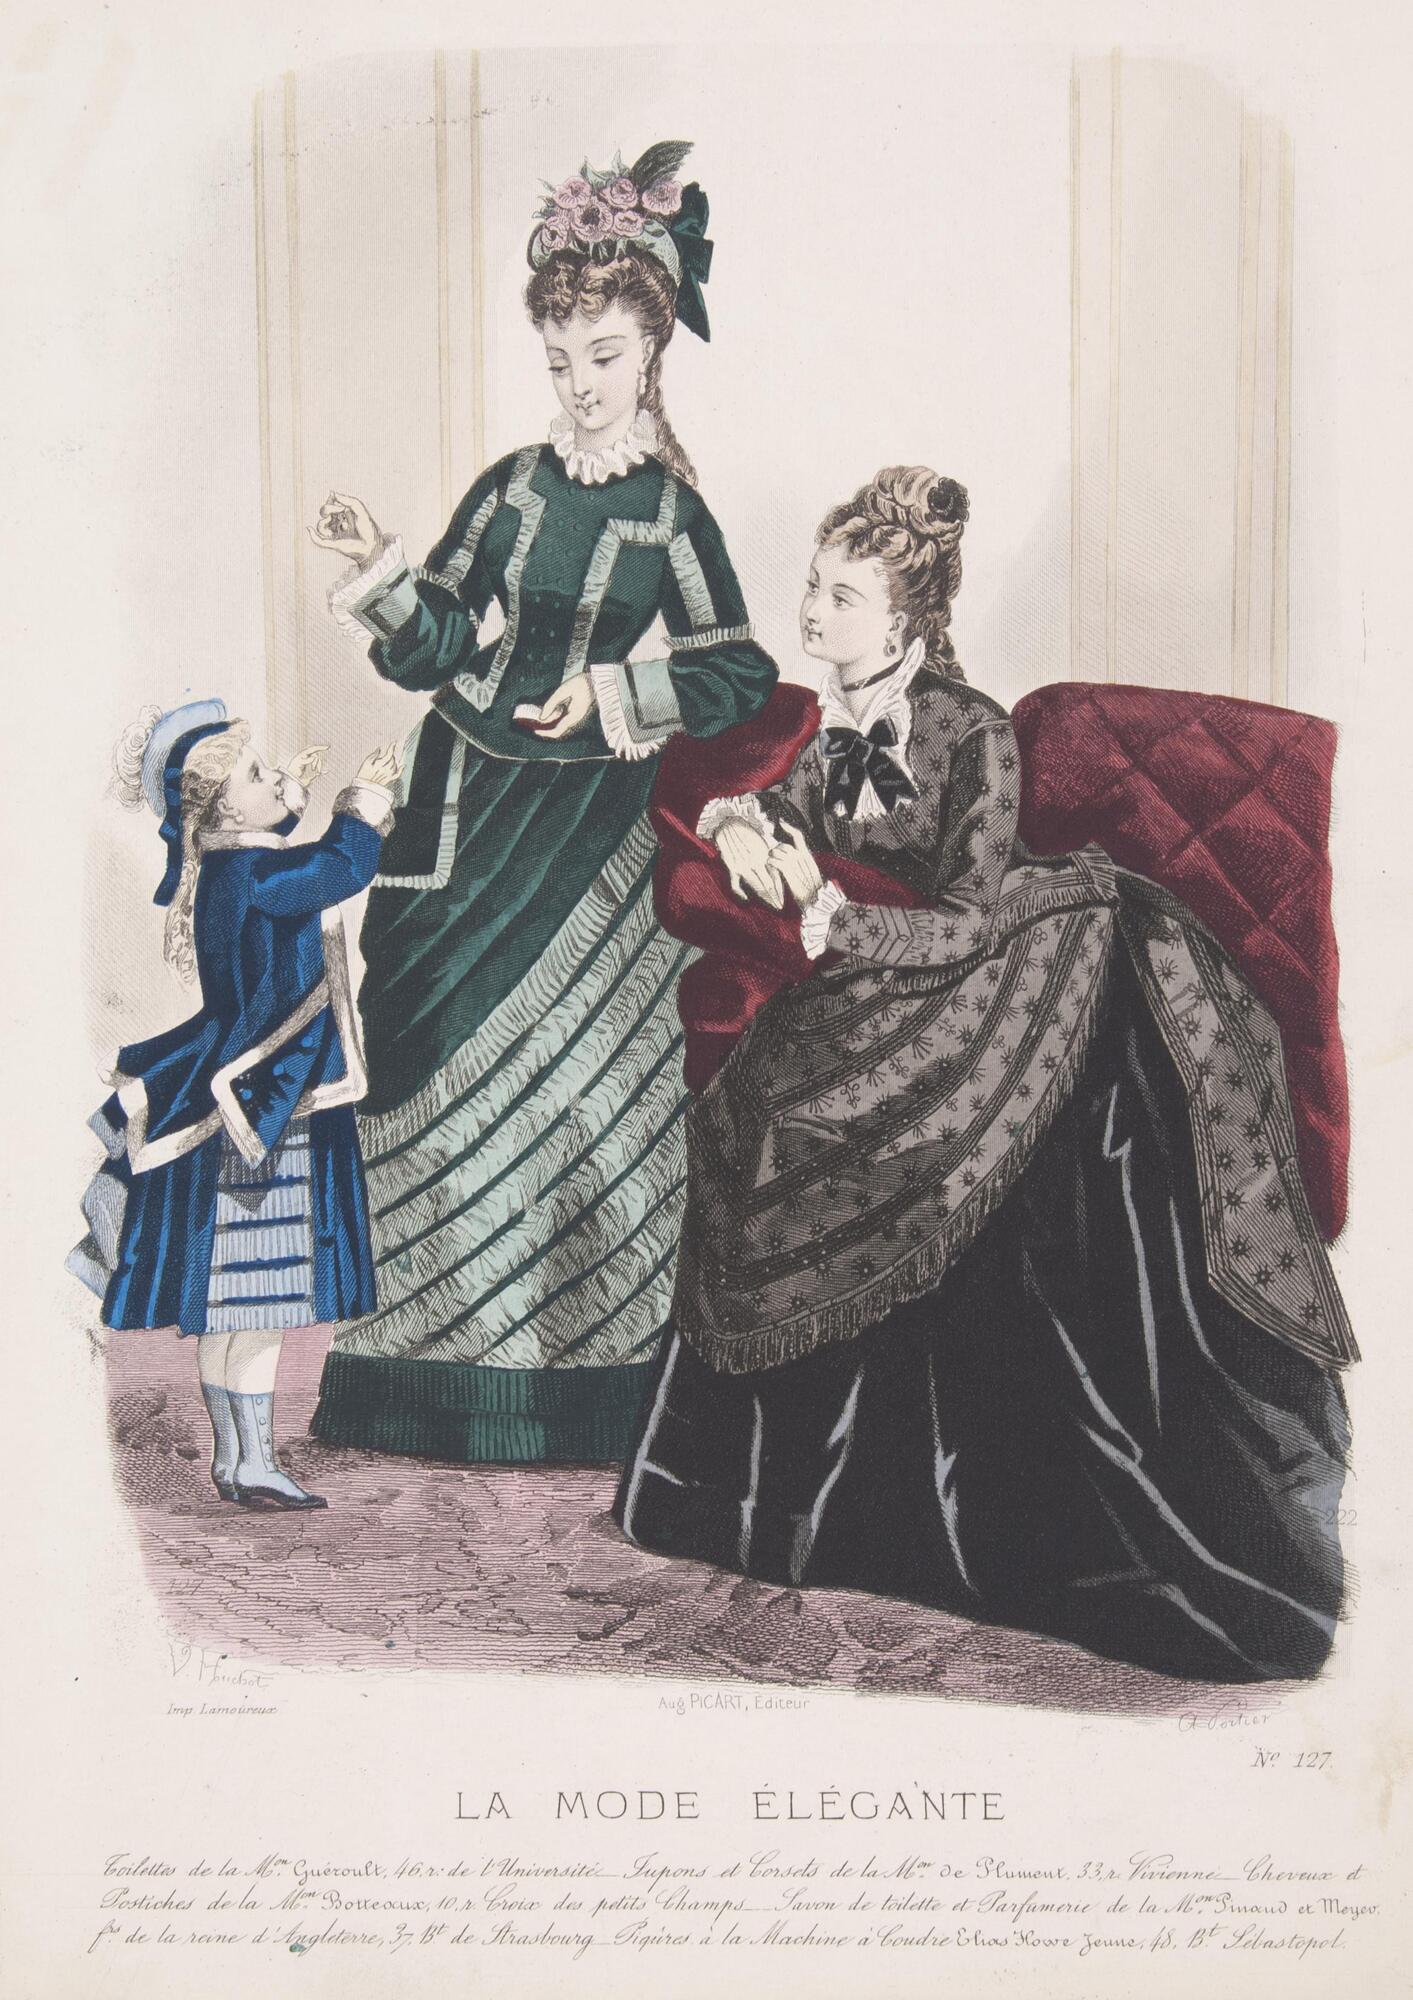 This colored engraving depicts two women and one child in elaborate dress. The central figure is a woman standing in a dark green dress decorated with lighter green trimmings. Her hair is gathered in a headpiece made up of green ribbons and pink flowers. To the right of her a woman in a black and grey dress sits on a burgundy chaise. The child standing on the left of the composition is outfitted in a navy blue and pale blue costume with a jacket trimmed in white. The child reaches toward something kept in the standing woman’s left hand.<br />